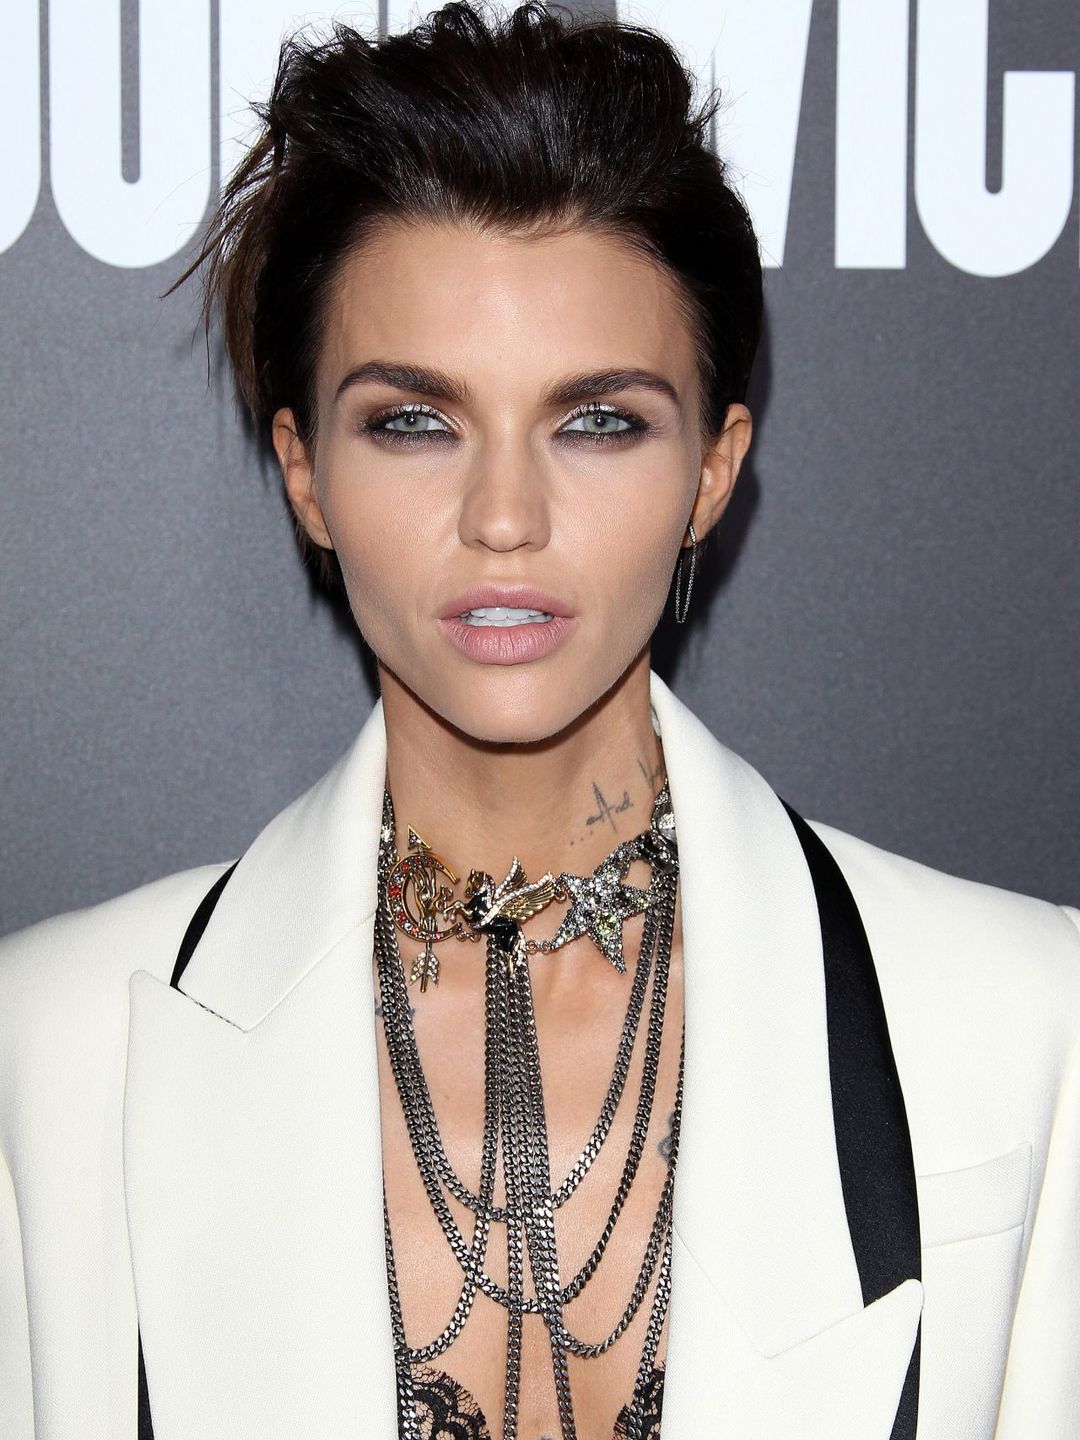 Ruby Rose early life